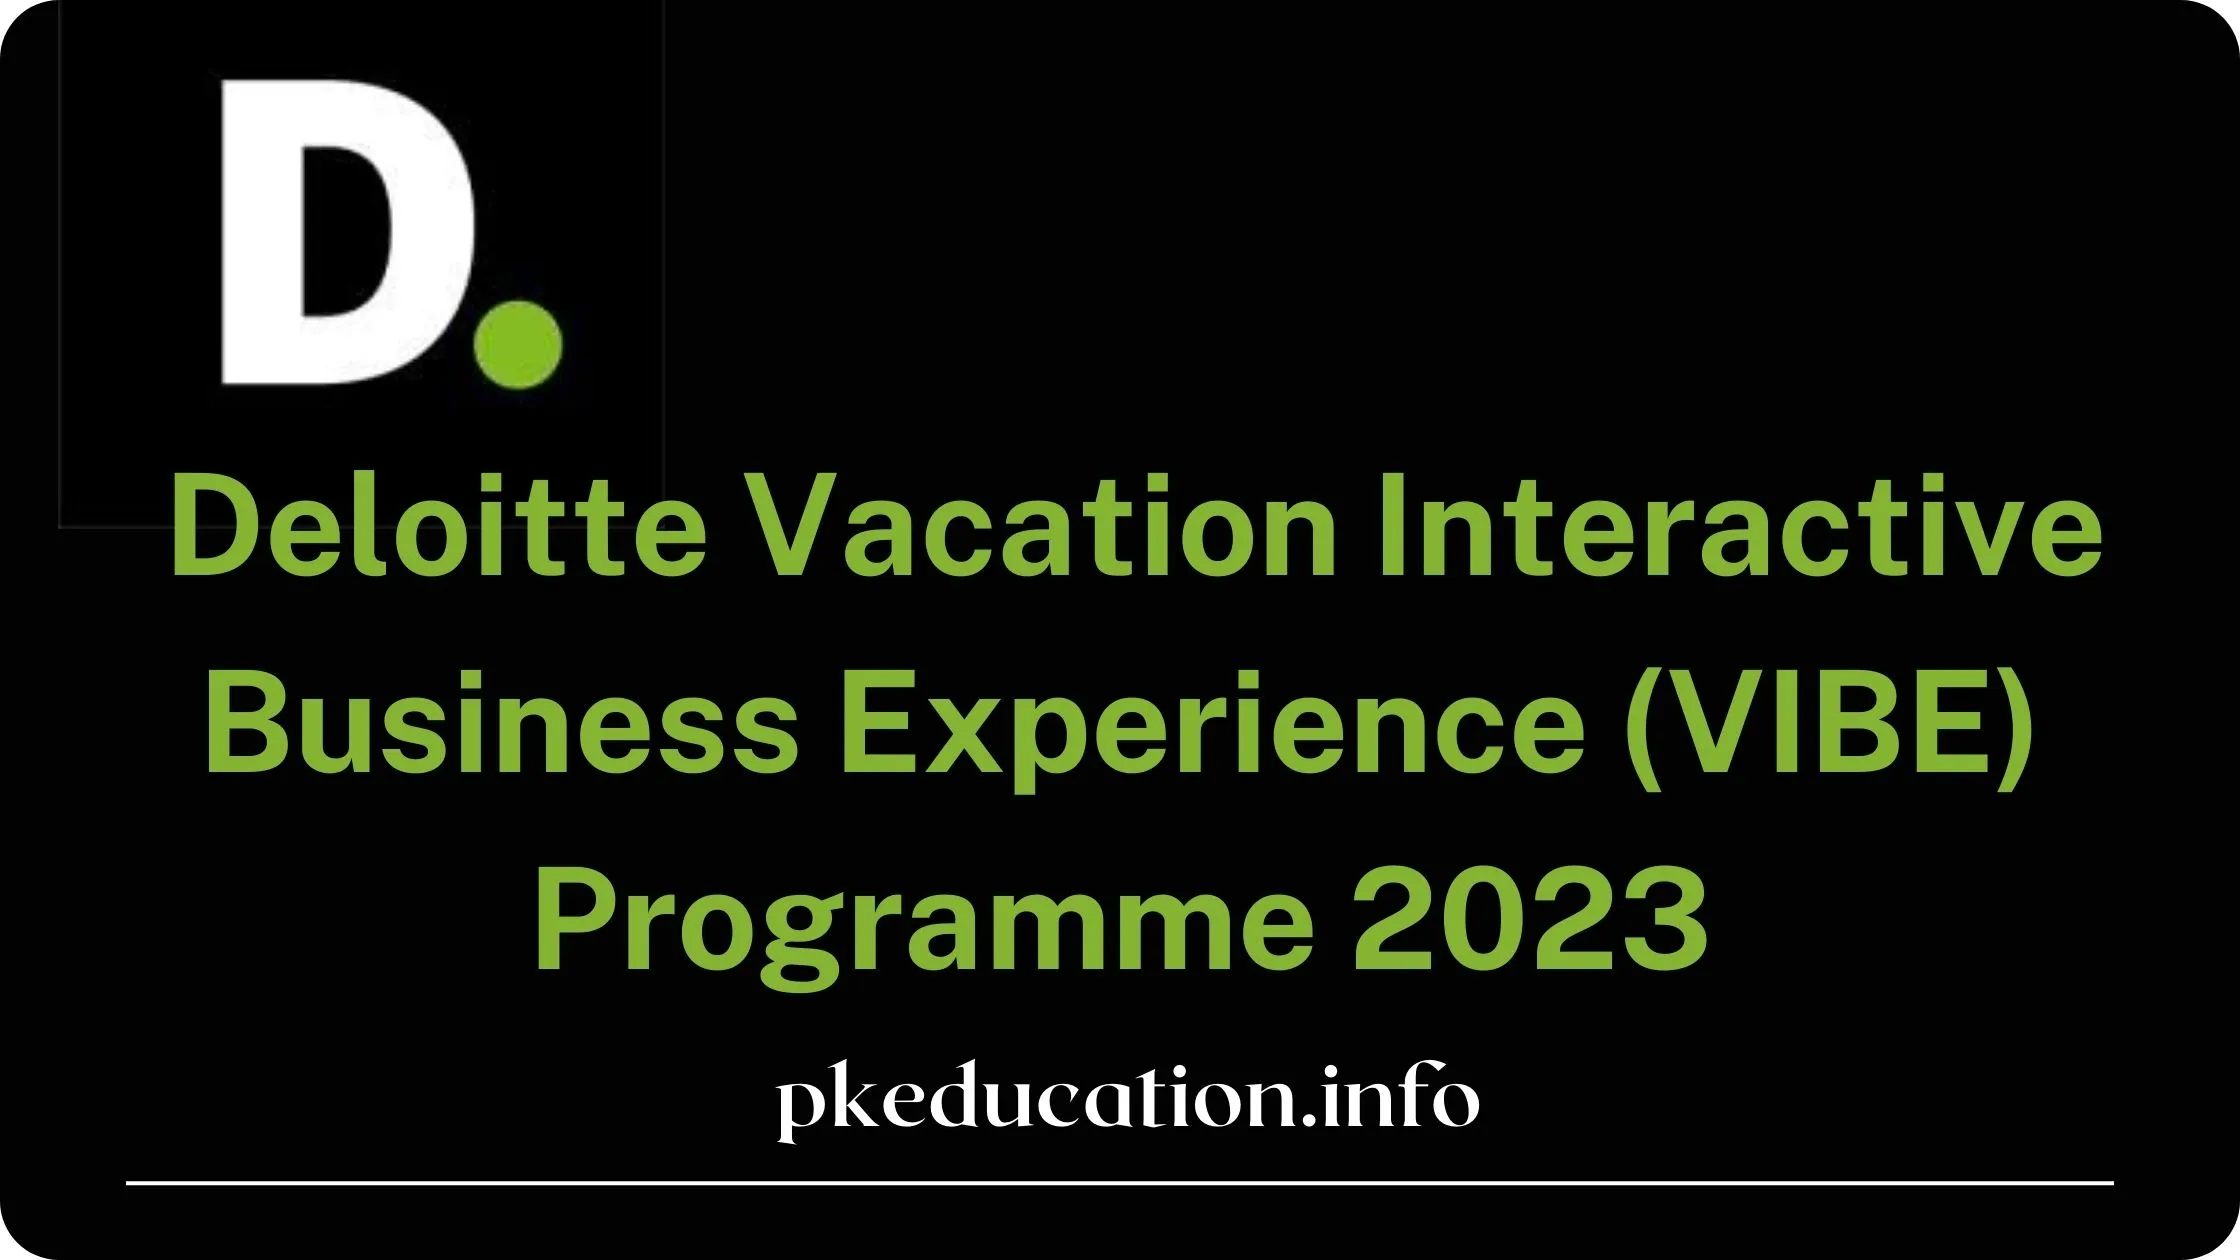 Deloitte Vacation Interactive Business Experience (VIBE) Programme 2023